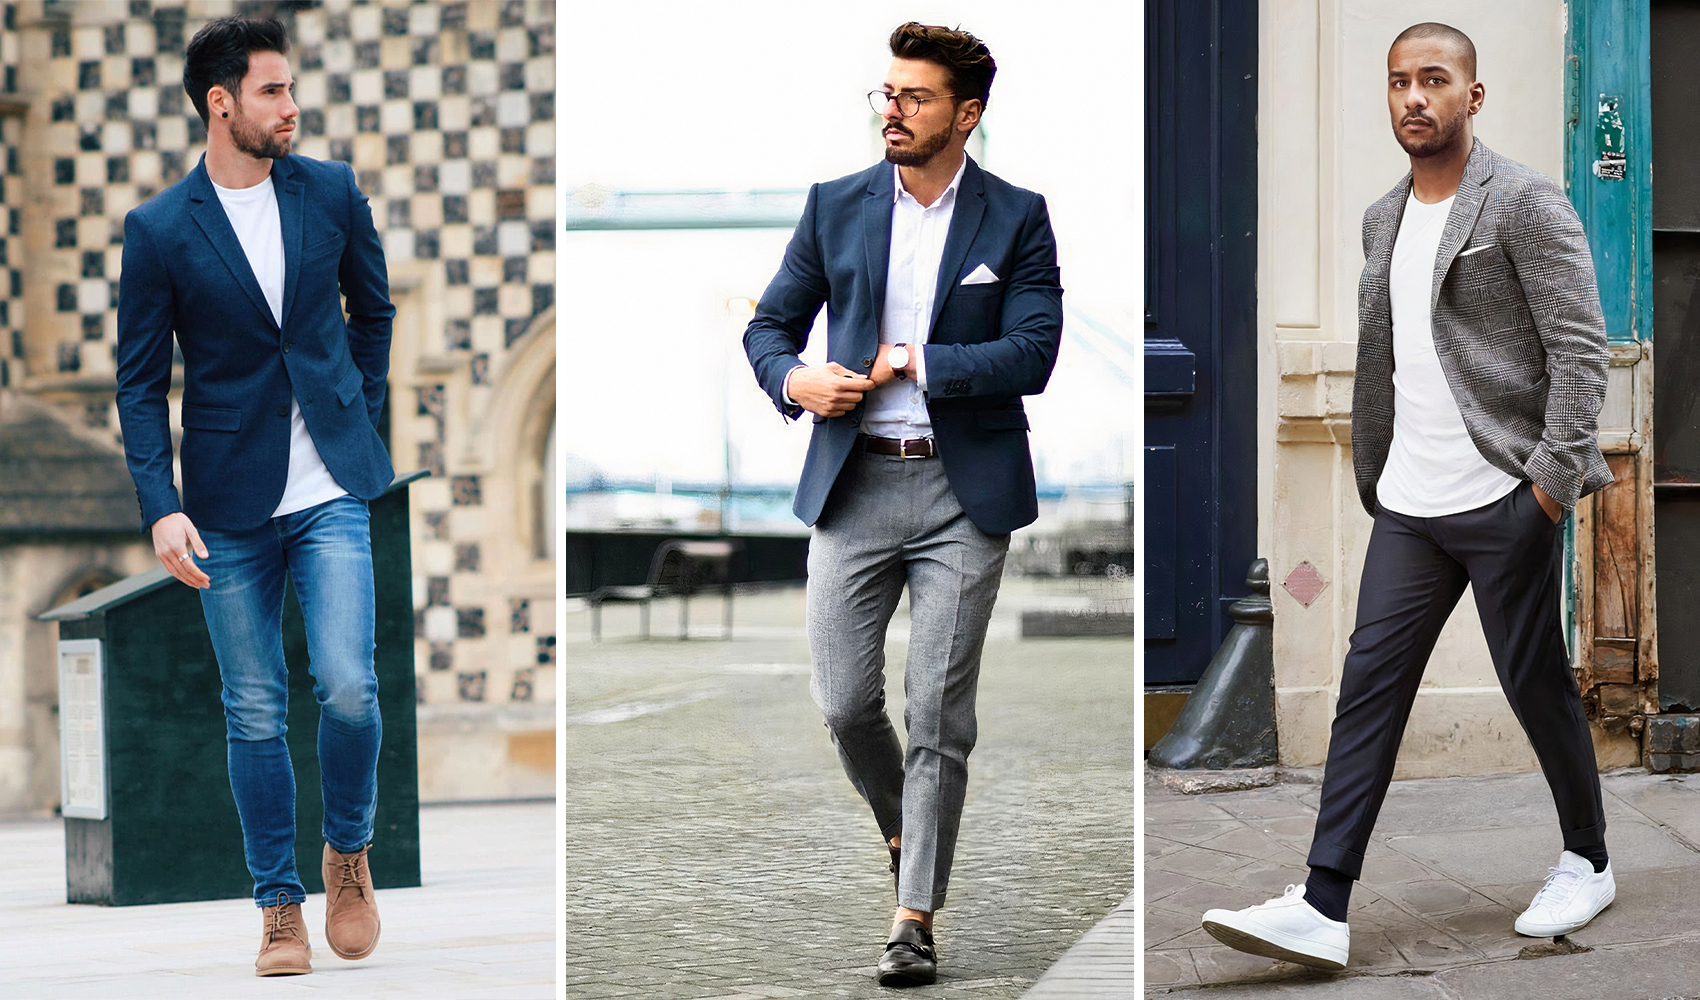 What's the Difference Between Business Casual and Smart Casual? A Handy  Guide on How to Dress. (Infographic) | Entrepreneur